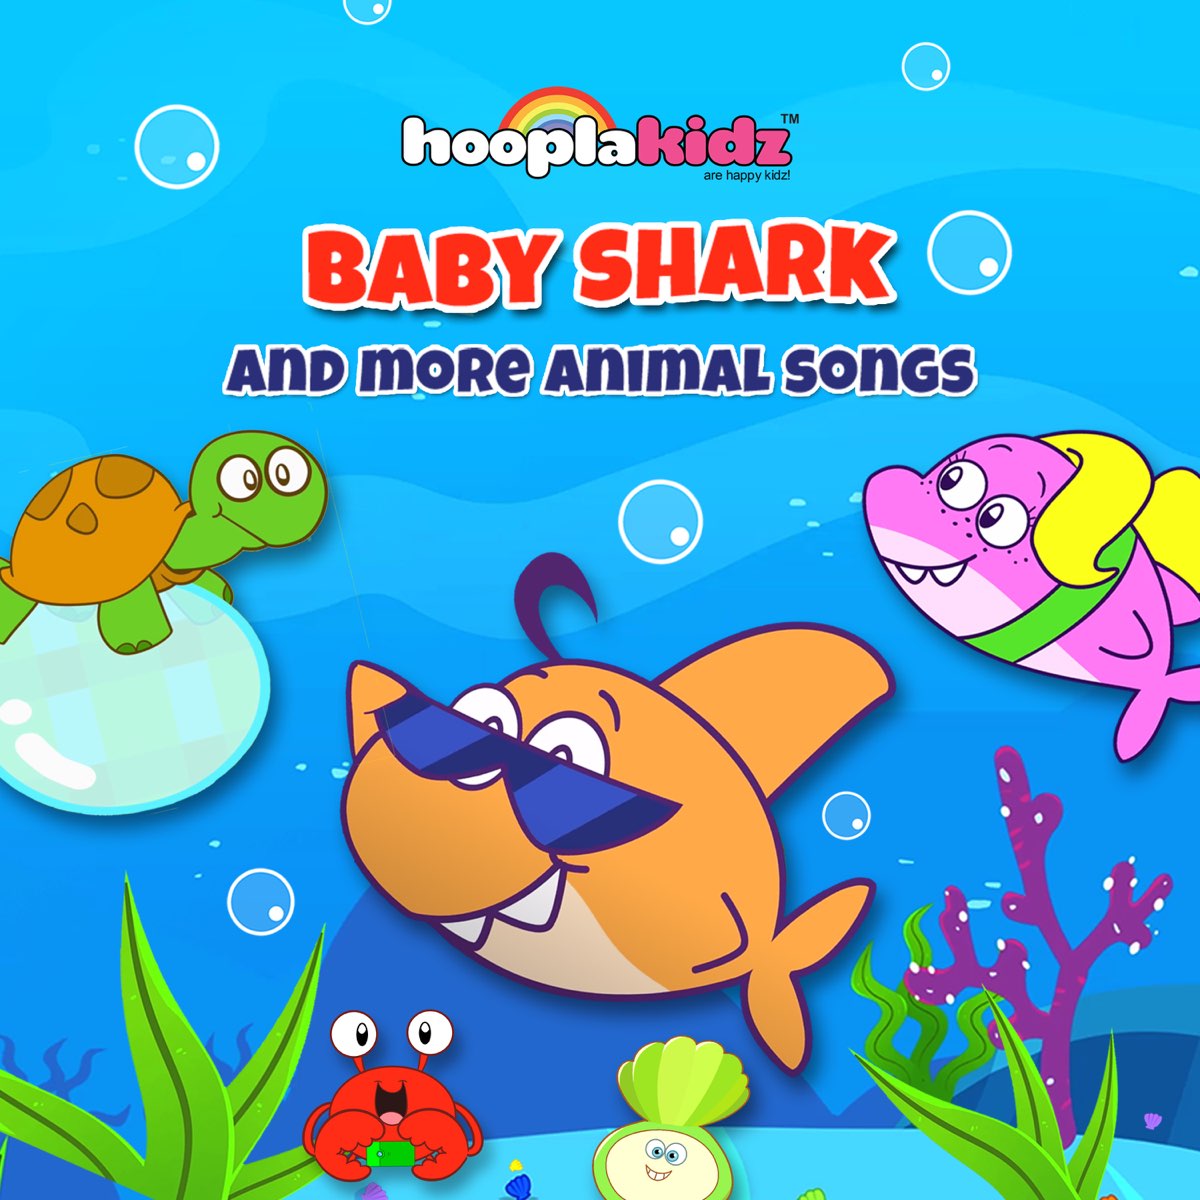 Baby Shark and More Animal Songs by HooplaKidz on Apple Music